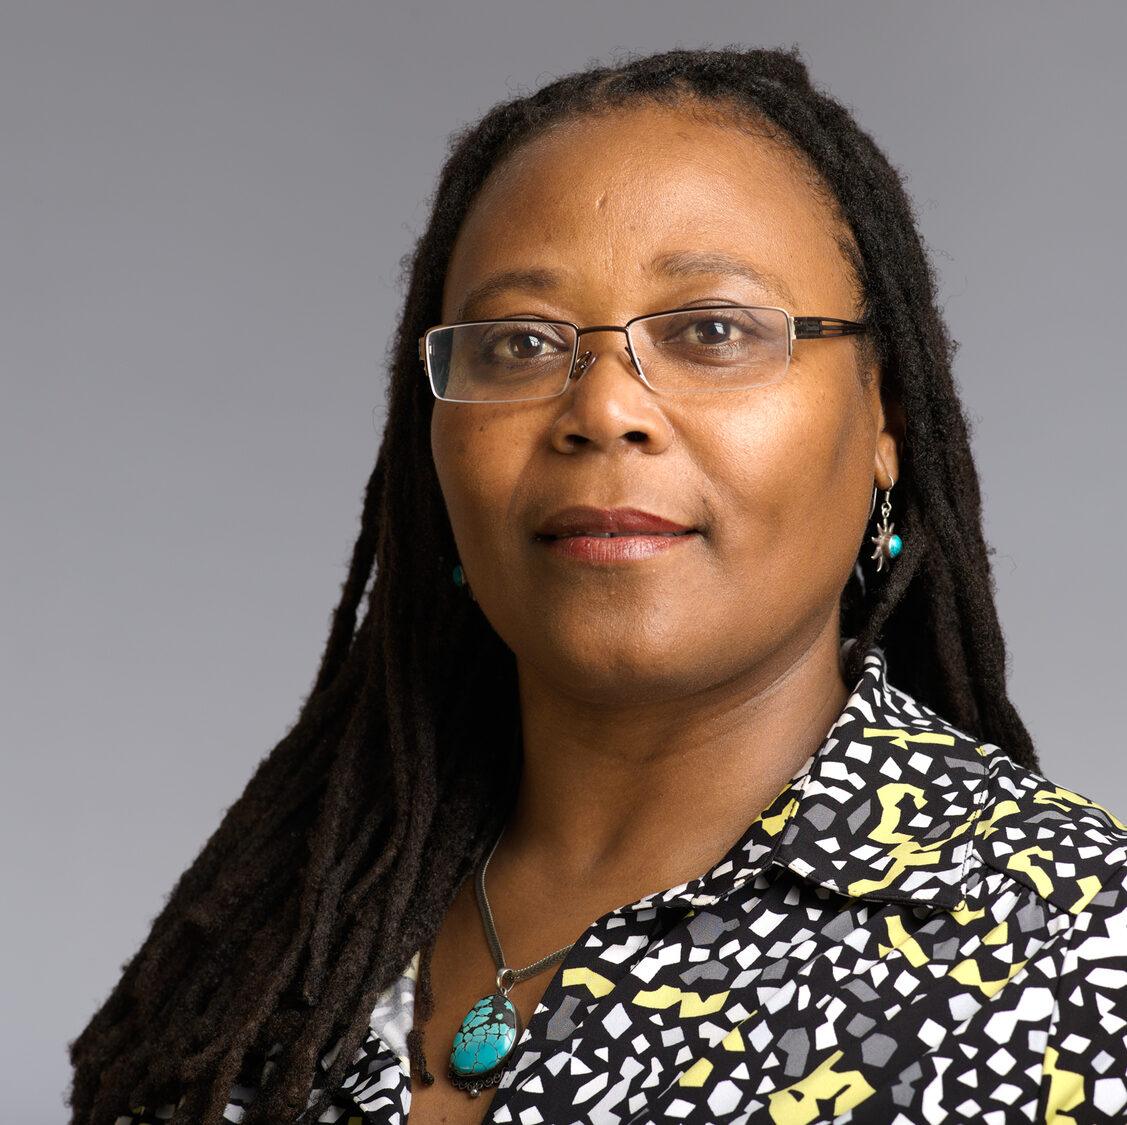 photo of Victoria Santos, an Afro-Latina woman with long dreadlocked hair. She is wearing glasses and a black blouse with yellow and grey geometric shapes.